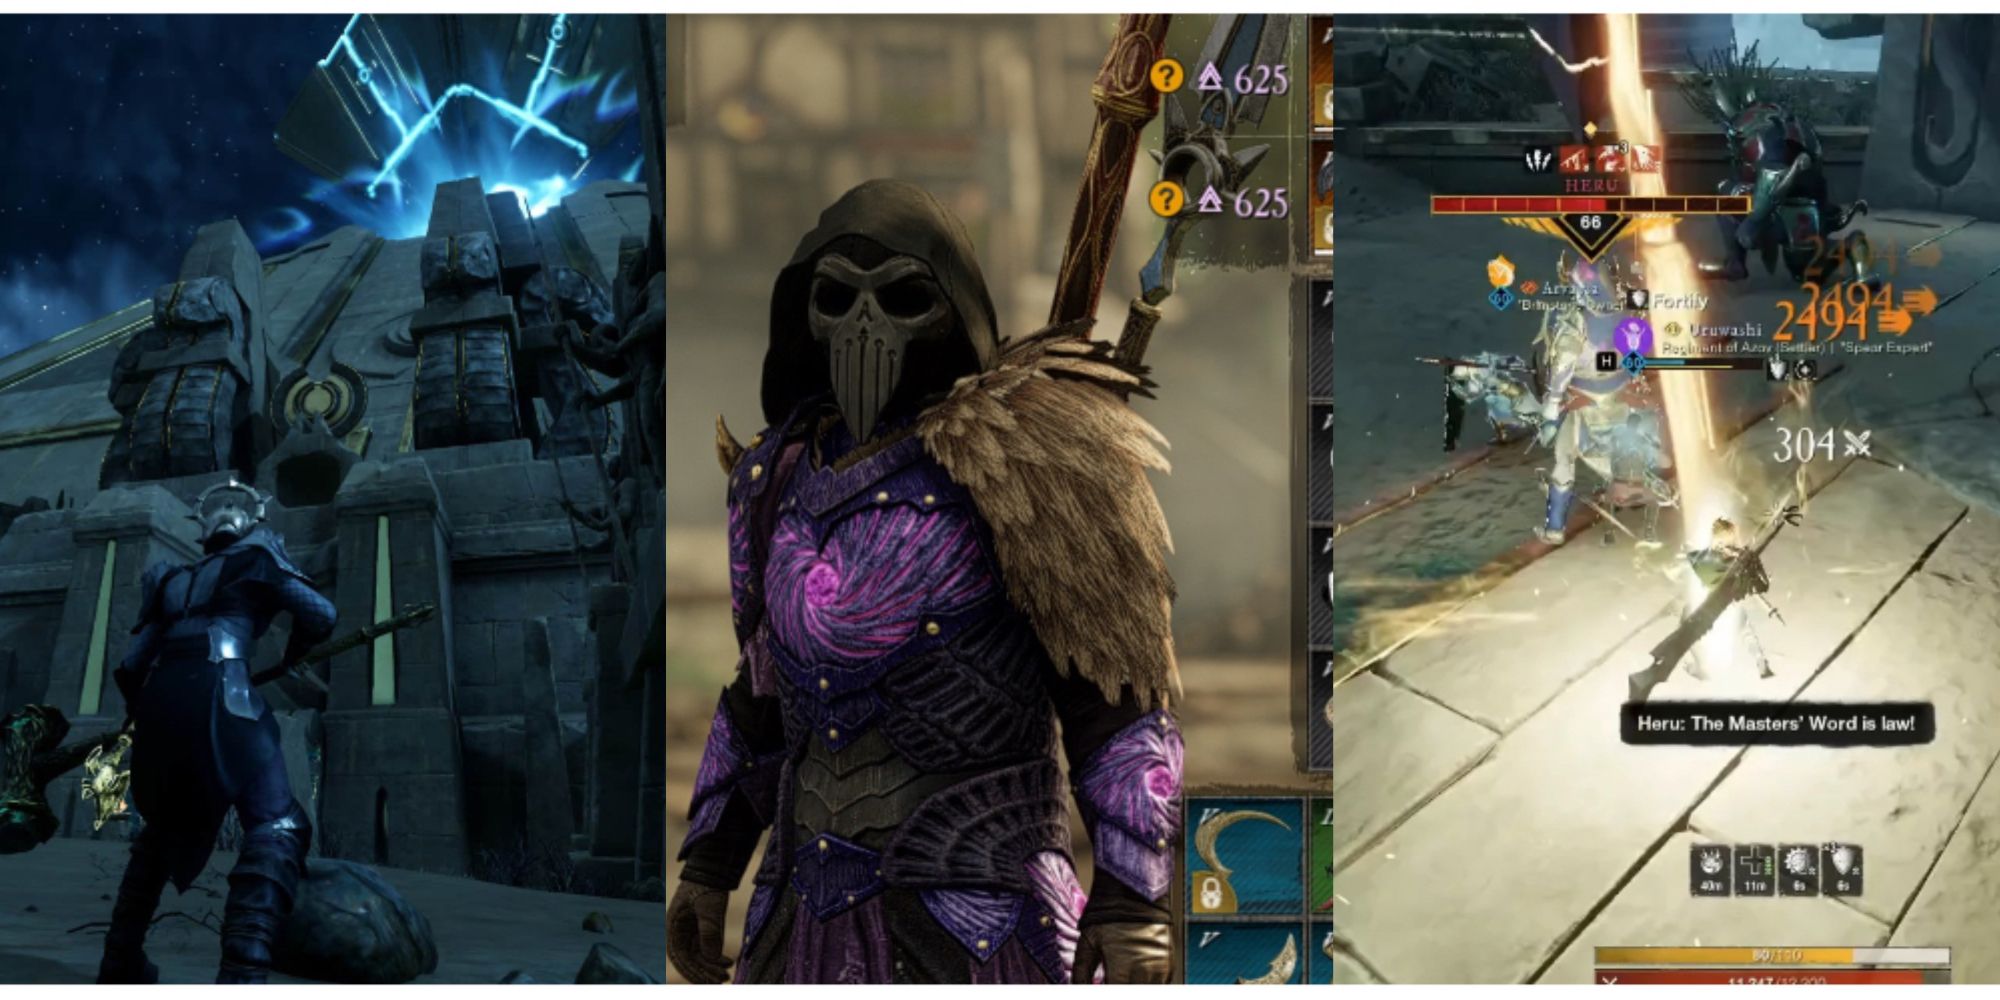 split image of entrance to Great Akhet Pyramid, Corrupted ward armor, and a battle with Heru in New World